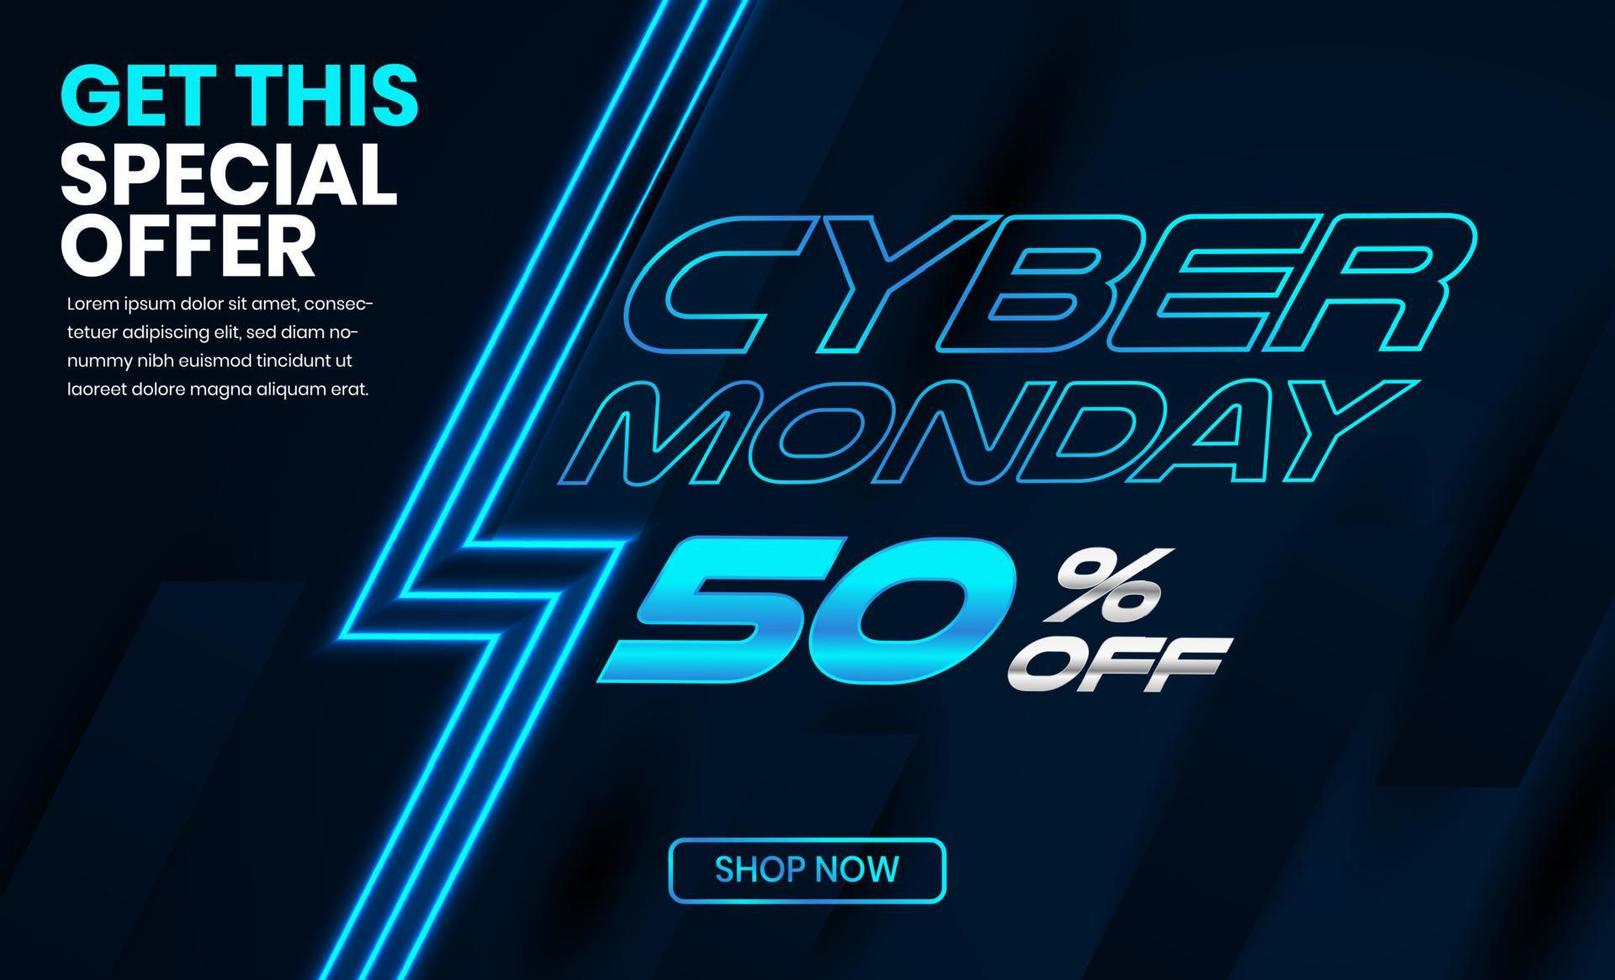 Sale banner template design, Cyber Monday sale up to 50 percent off vector